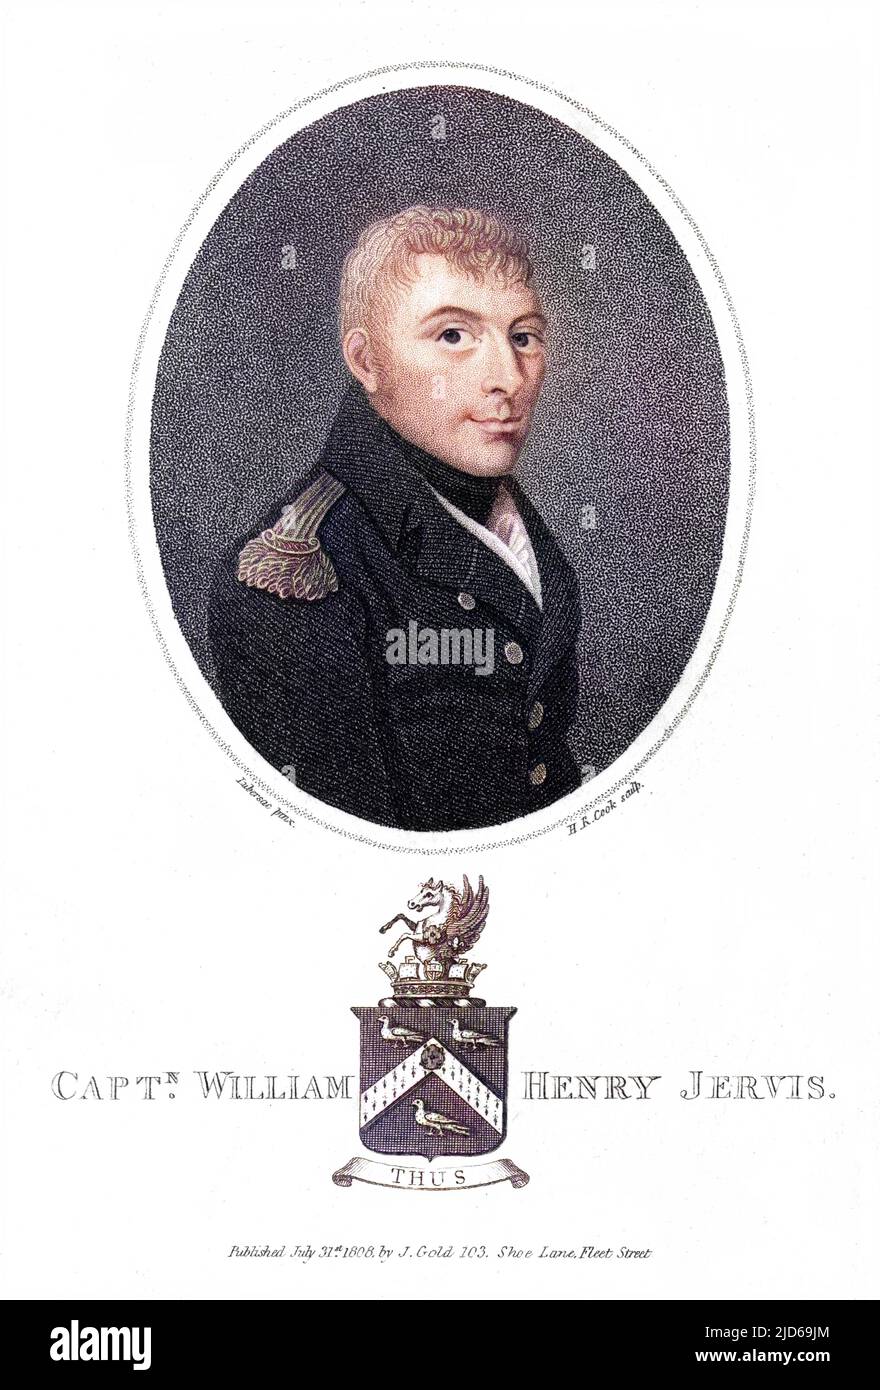 WILLIAM HENRY JERVIS British naval commander Colourised version of : 10161871       Date: CIRCA 1808 Stock Photo